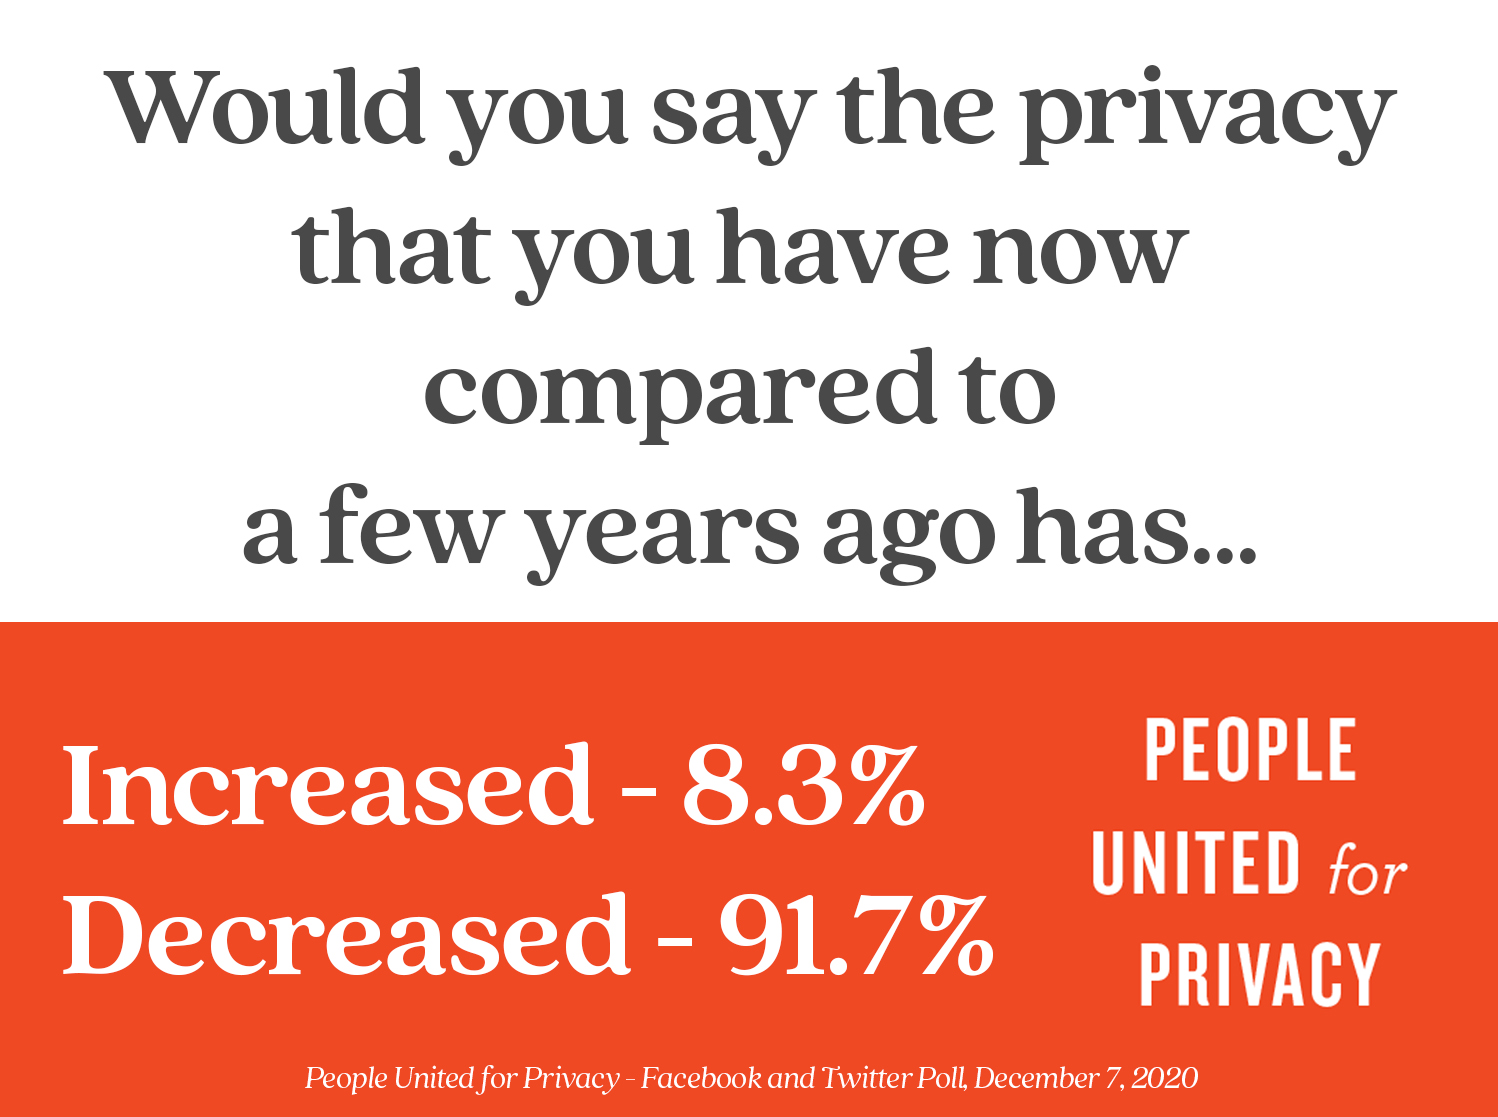 91% of Americans believe they have less privacy compared to a few years ago